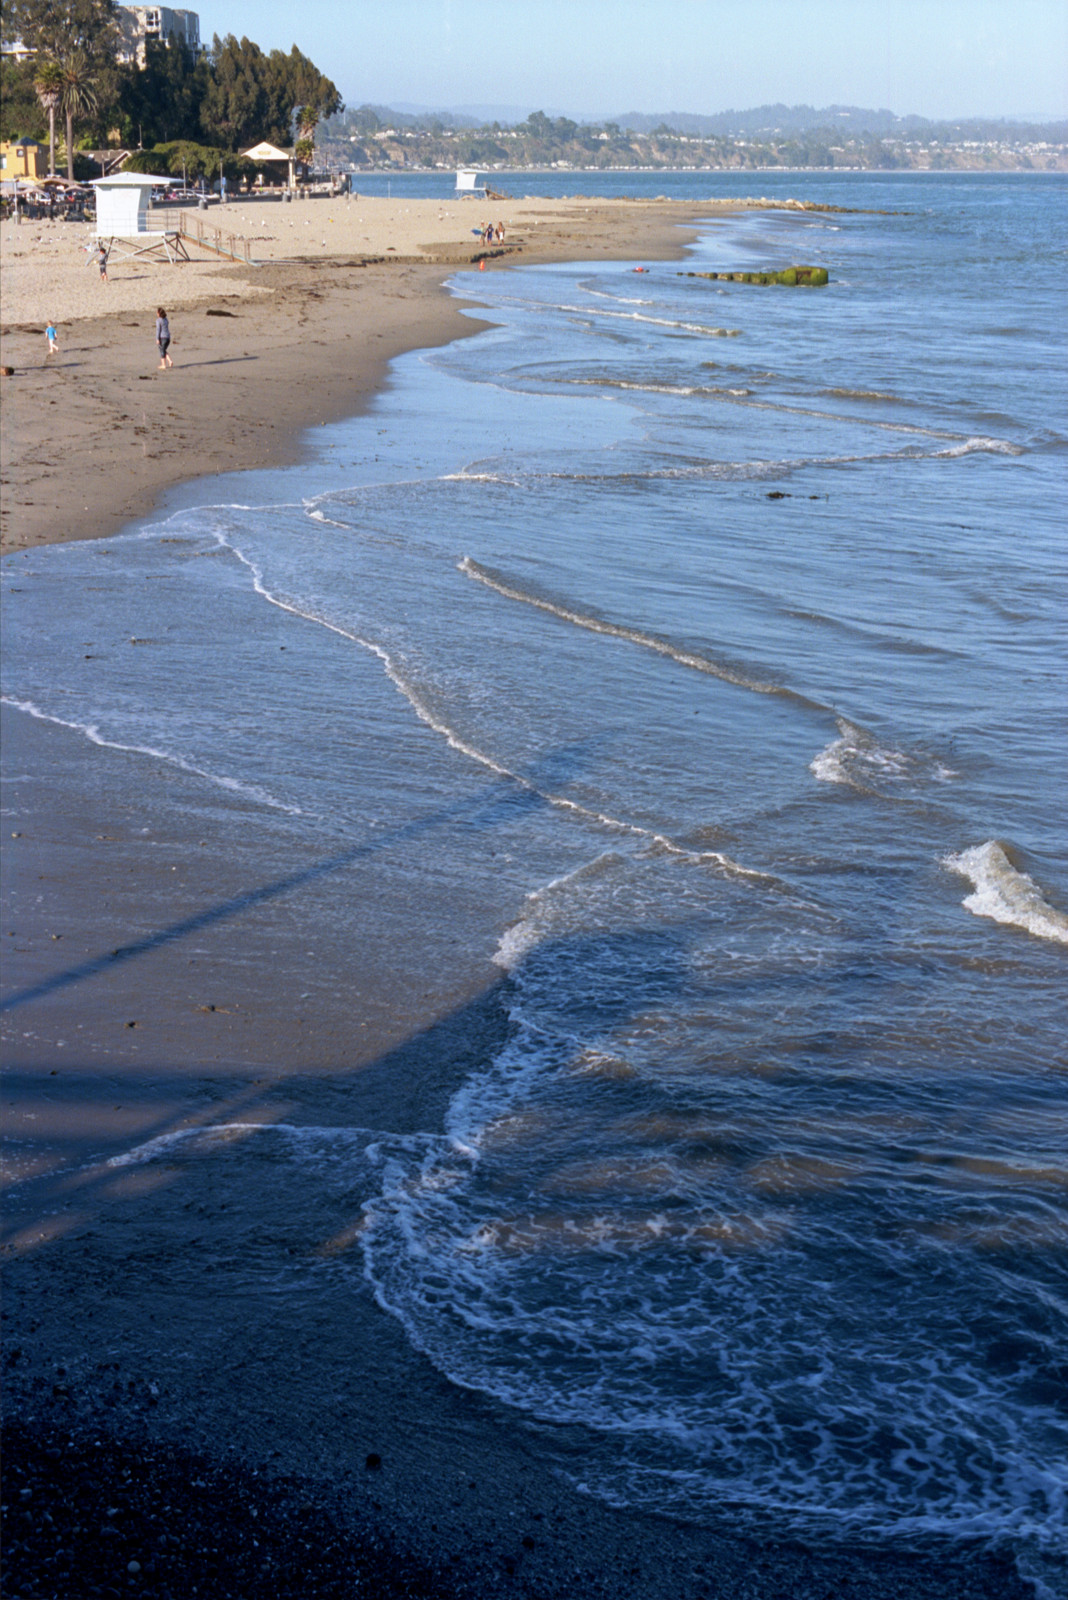 Surf is low at Capitola today, but the curve of the surfline is nice, the white foam edges of the wavelets make patterns over the sand; the shadow of the wharf falls on the beach.